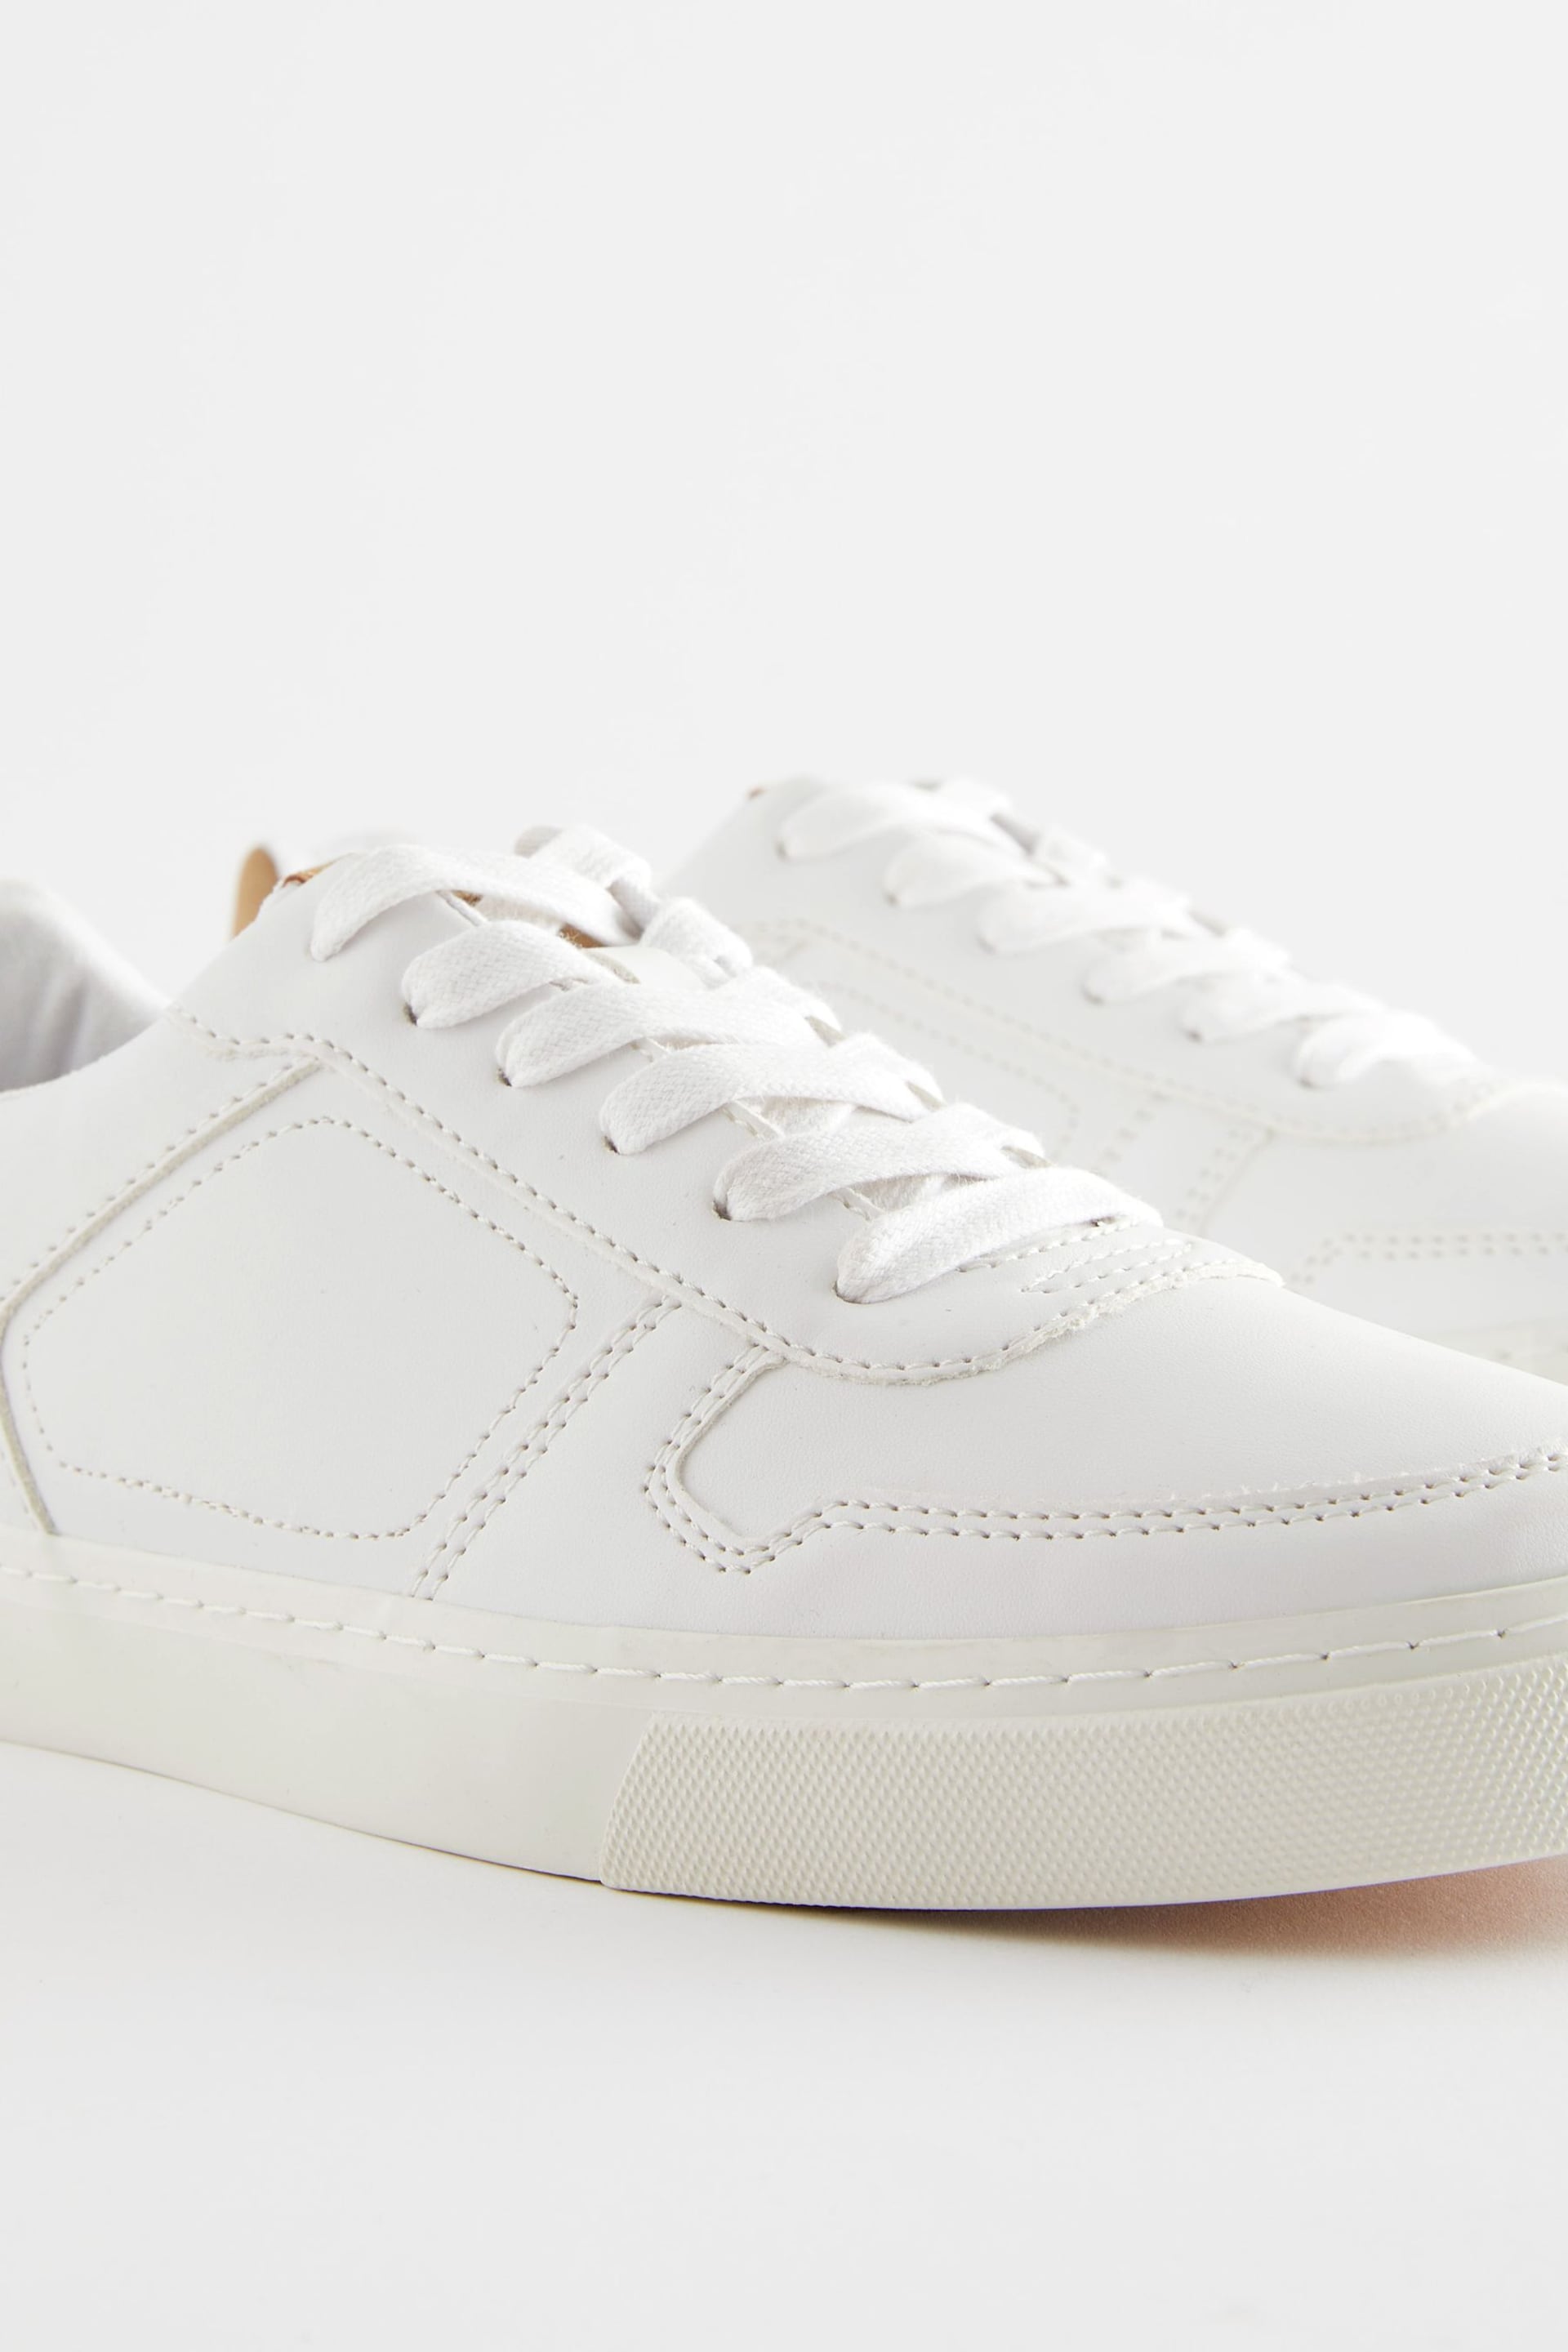 White Lace Up Low Trainers - Image 4 of 6